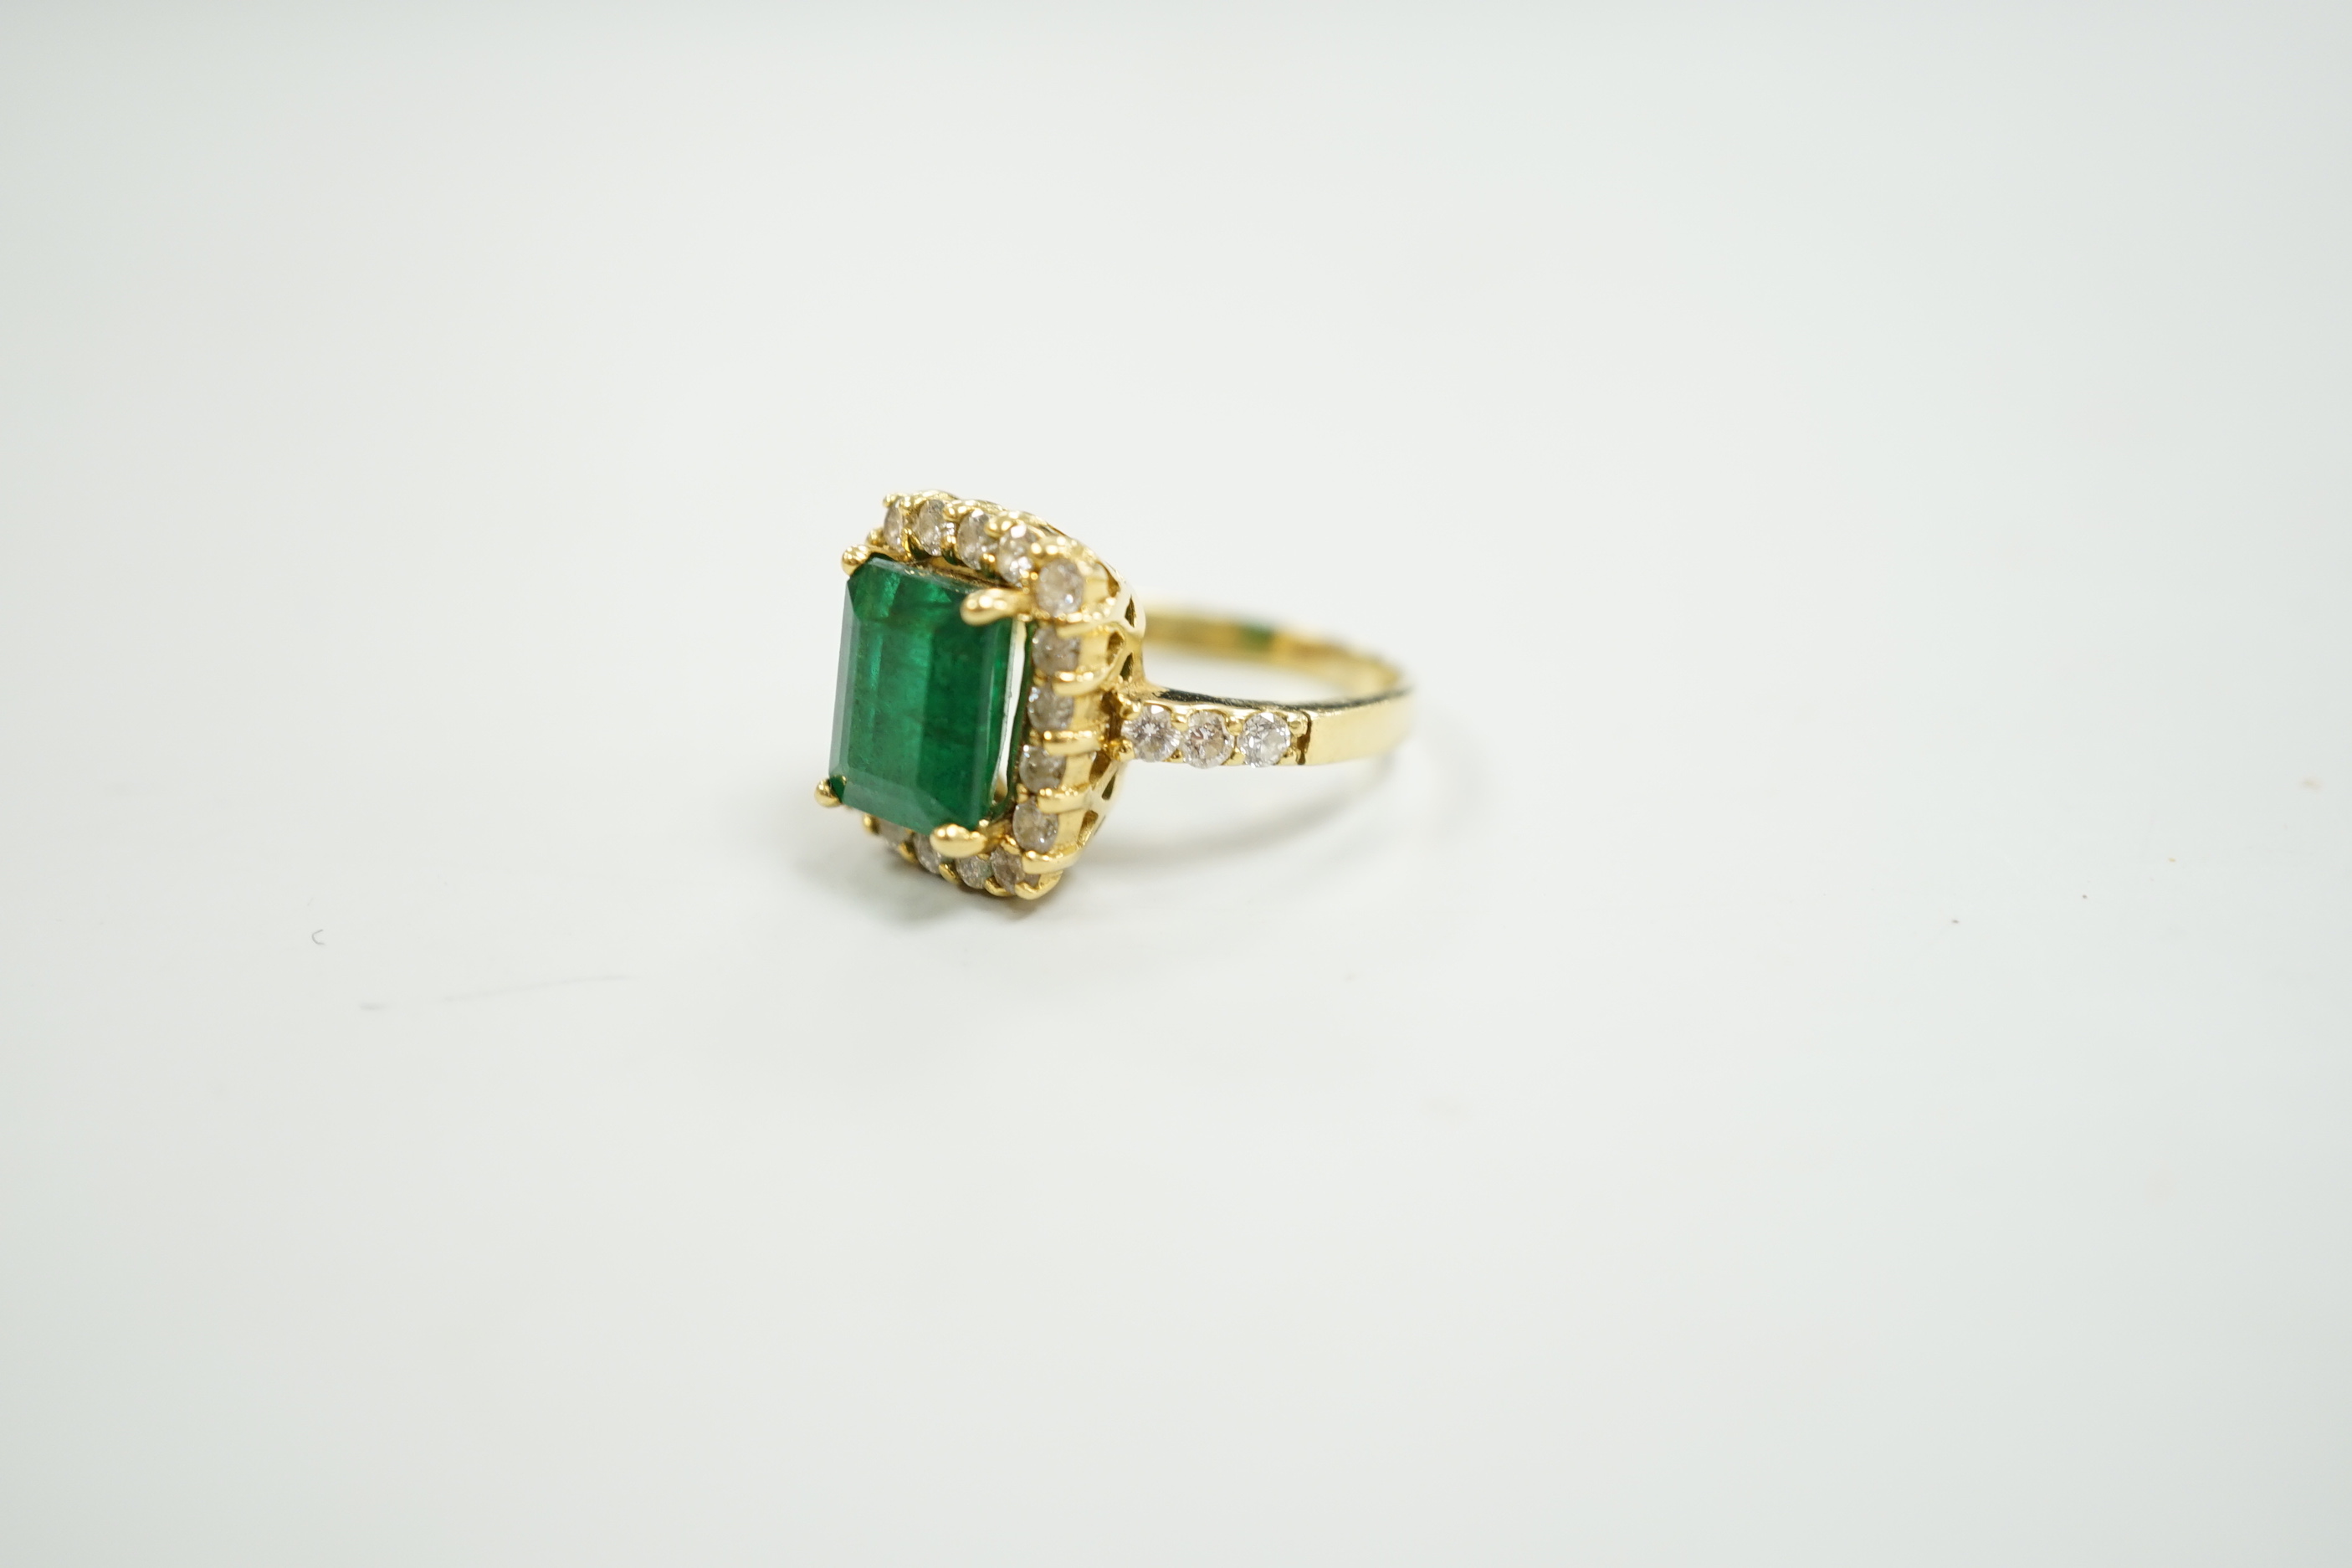 A modern 18ct gold and single stone emerald set dress ring, with diamond set border and shoulders, size L, gross weight 6.5 grams, with accompanying Beverley Hills Gemological Laboratory appraisal certificate date 18/11.